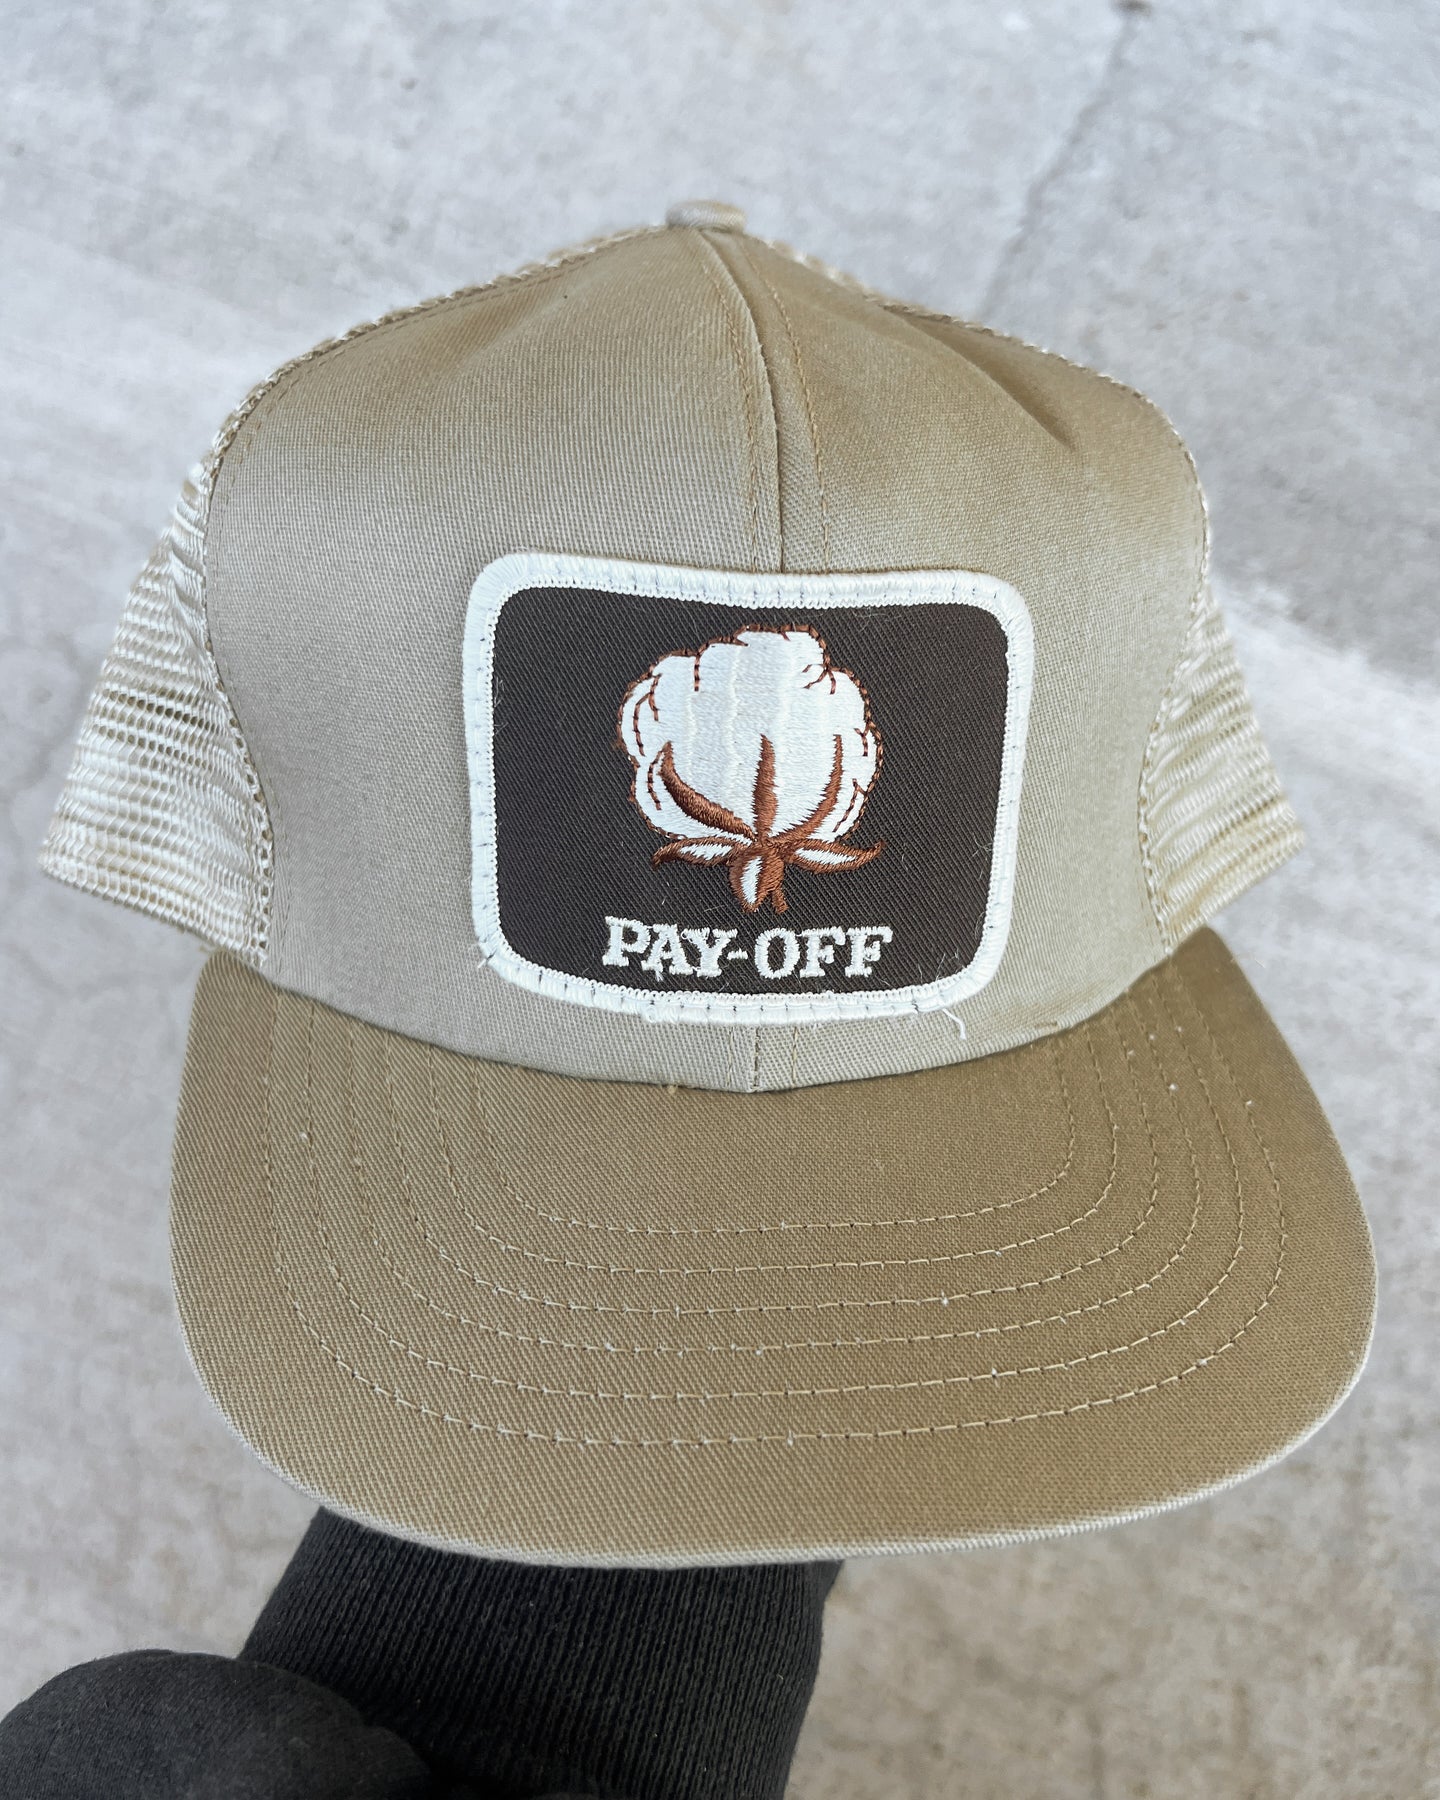 1990s Cotton Pay-Off Snapback Trucker - One Size